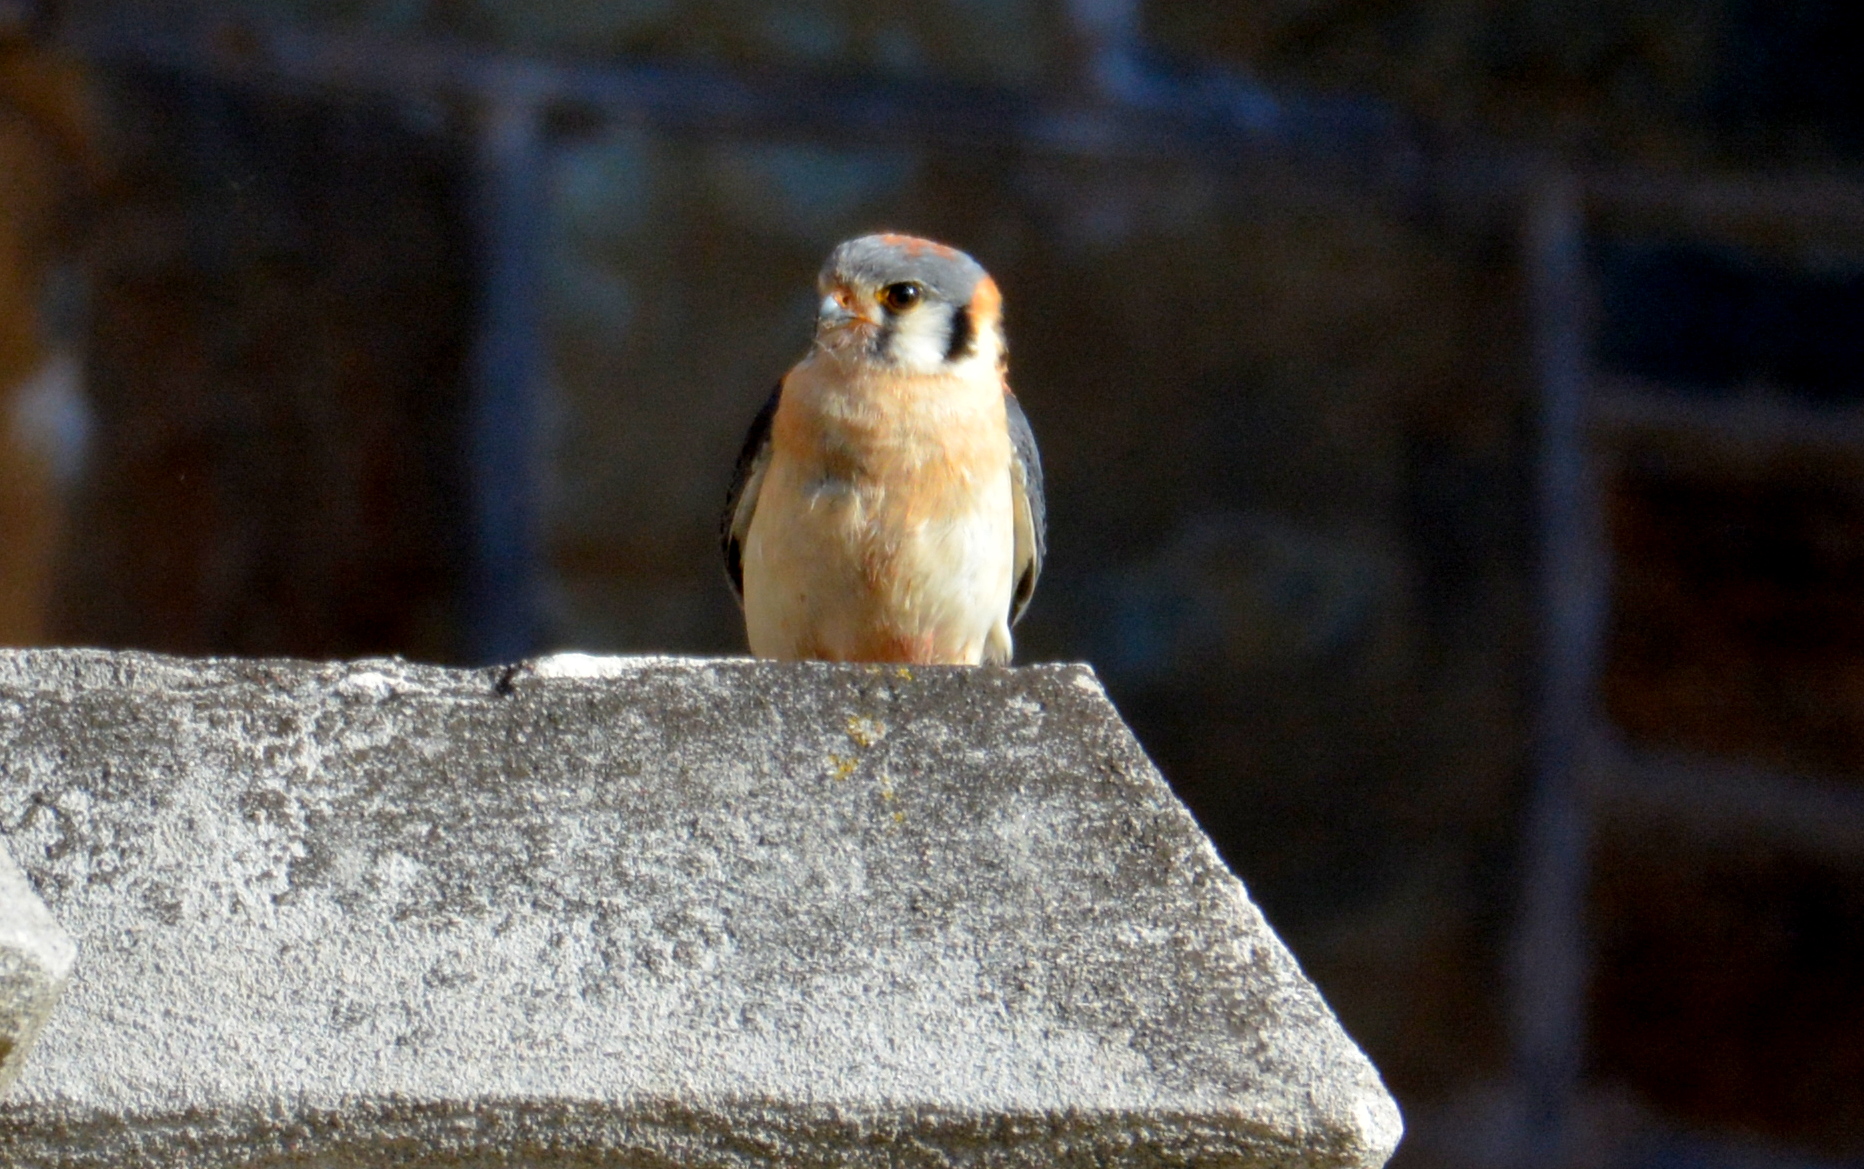 A male American Kestrel came into the canyon and perched on the church not far from our Fledge Watch post